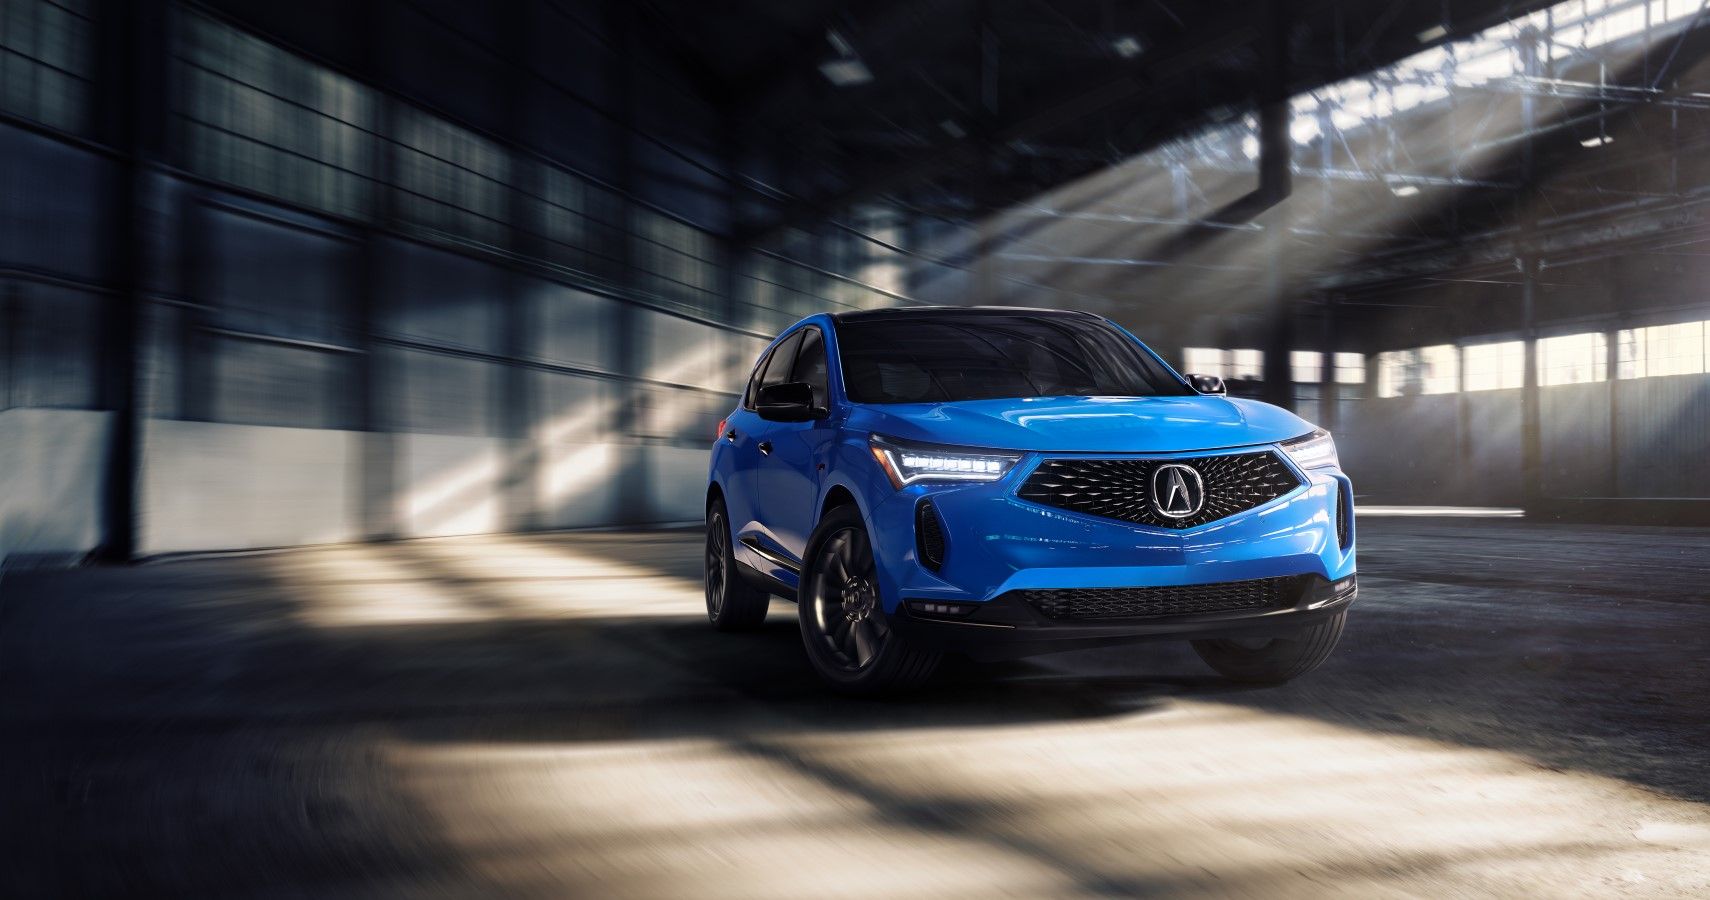 2022 Acura RDX PMC Edition flaunts a wild blue color